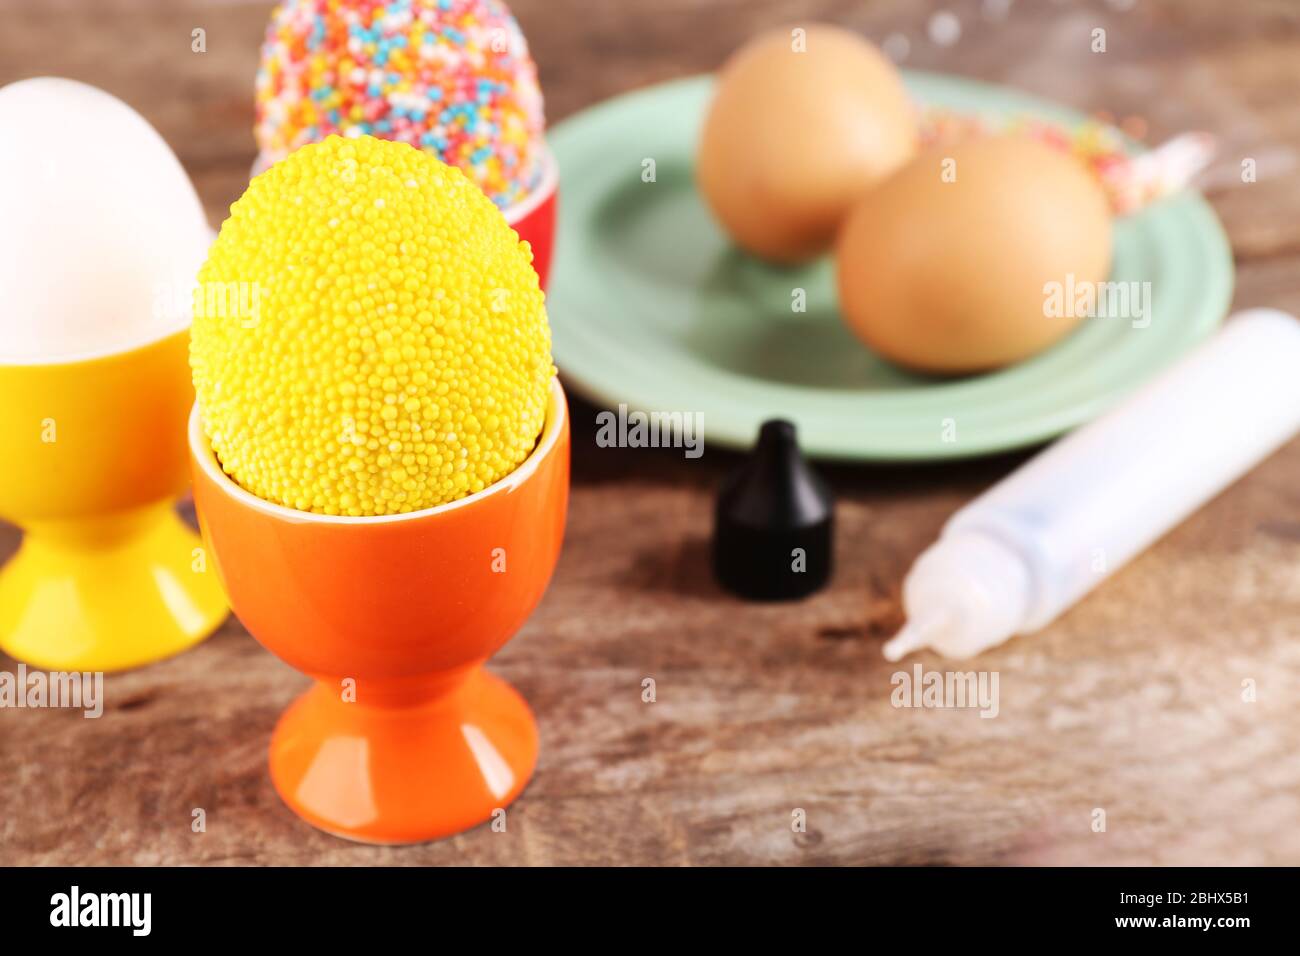 Decoration Easter eggs with colorful beads on wooden table, closeup Stock Photo